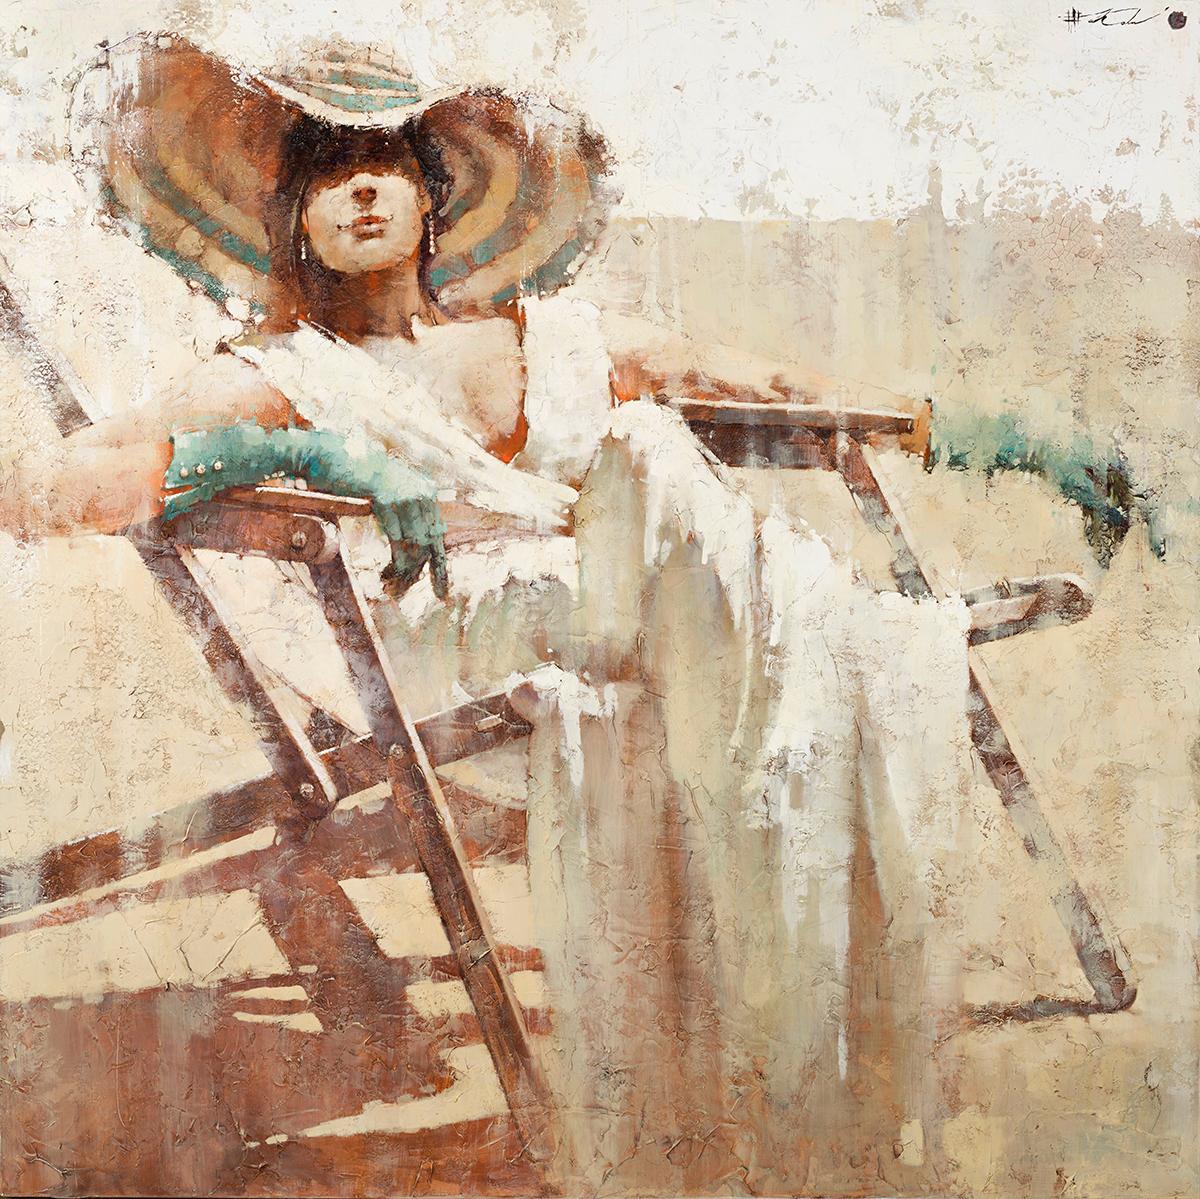 Andre Kohn  Figurative Painting - "Rhapsody on the theme of Turquoise" Beach inspired figurative oil painting 